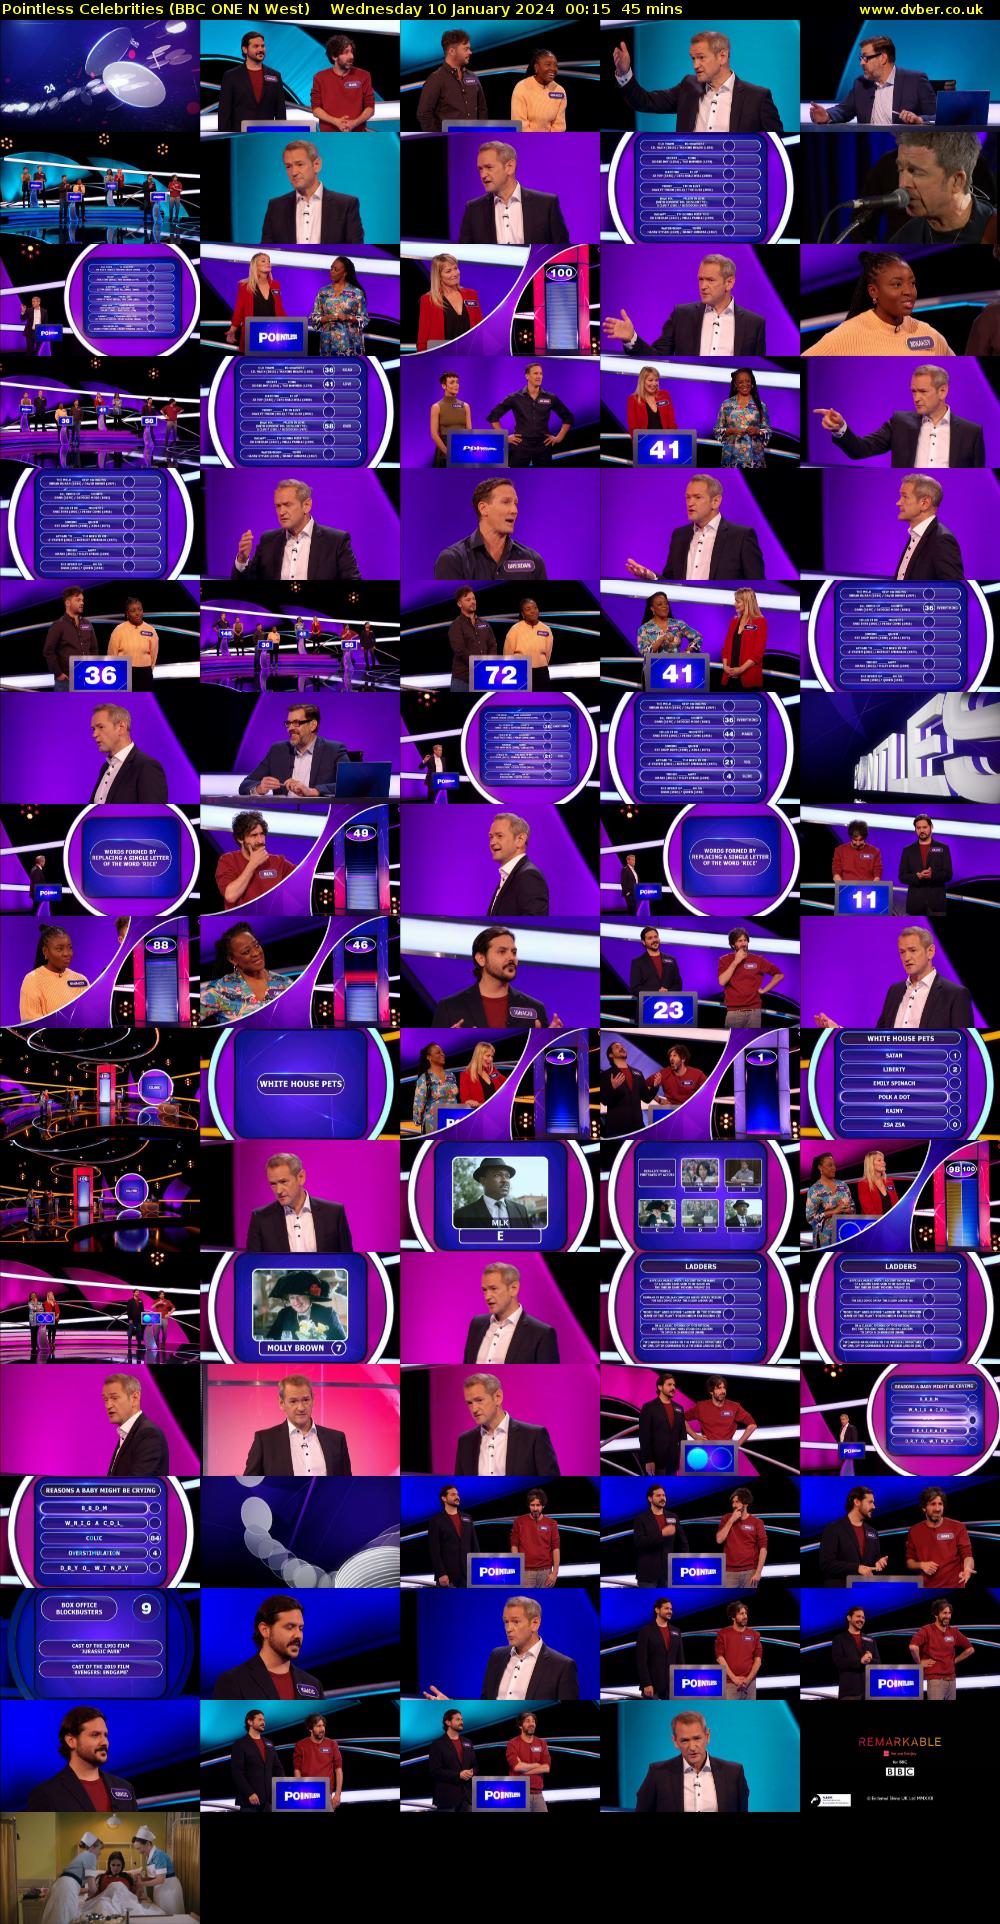 Pointless Celebrities (BBC ONE N West) Wednesday 10 January 2024 00:15 - 01:00